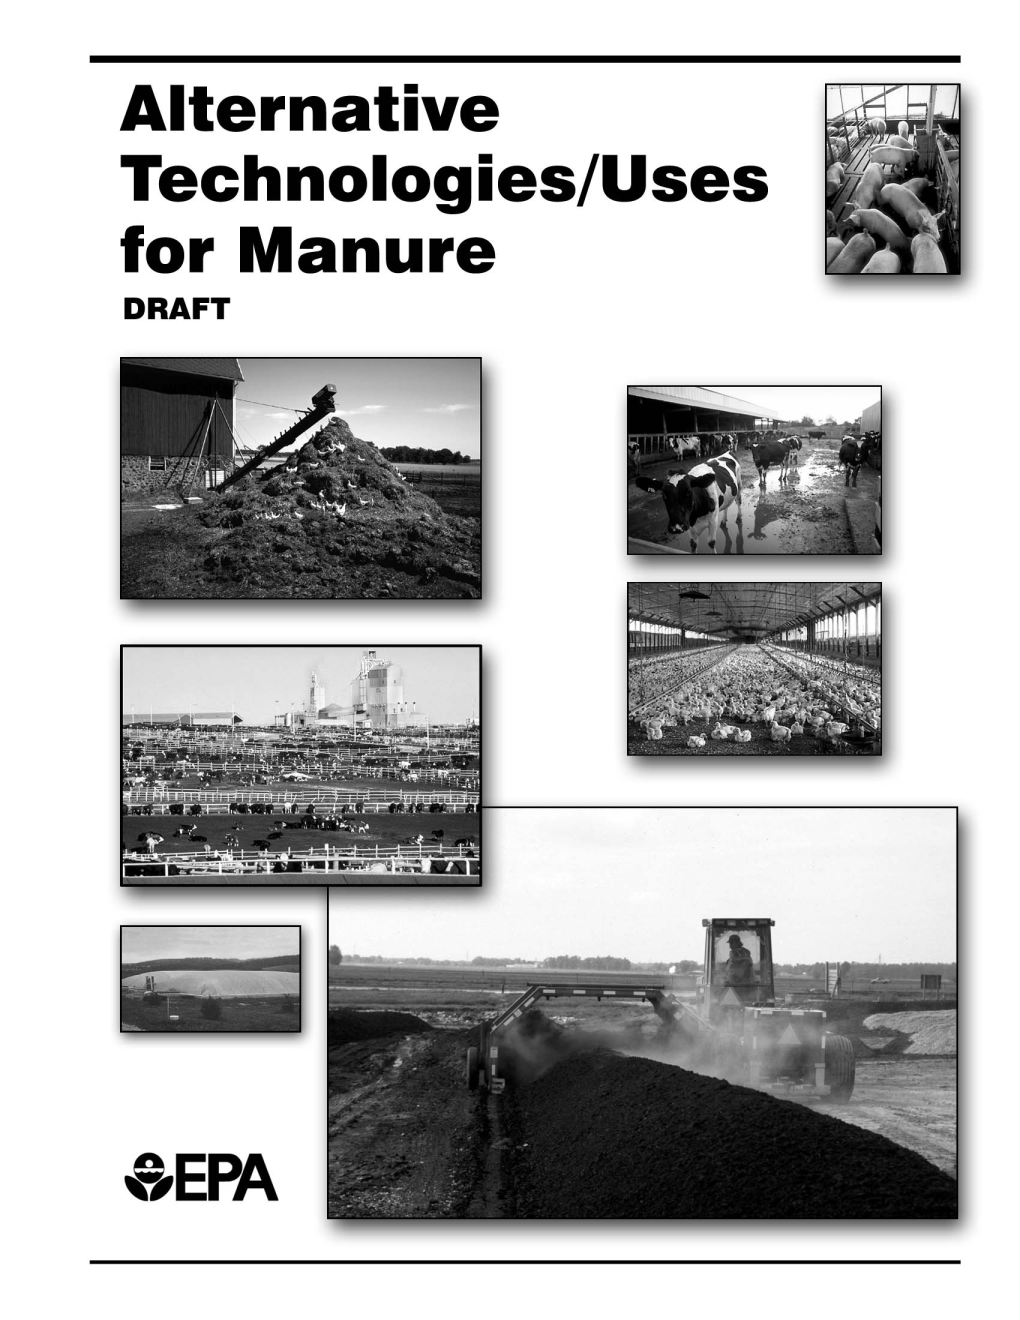 Draft Report: Alternative Technologies/Uses for Manure